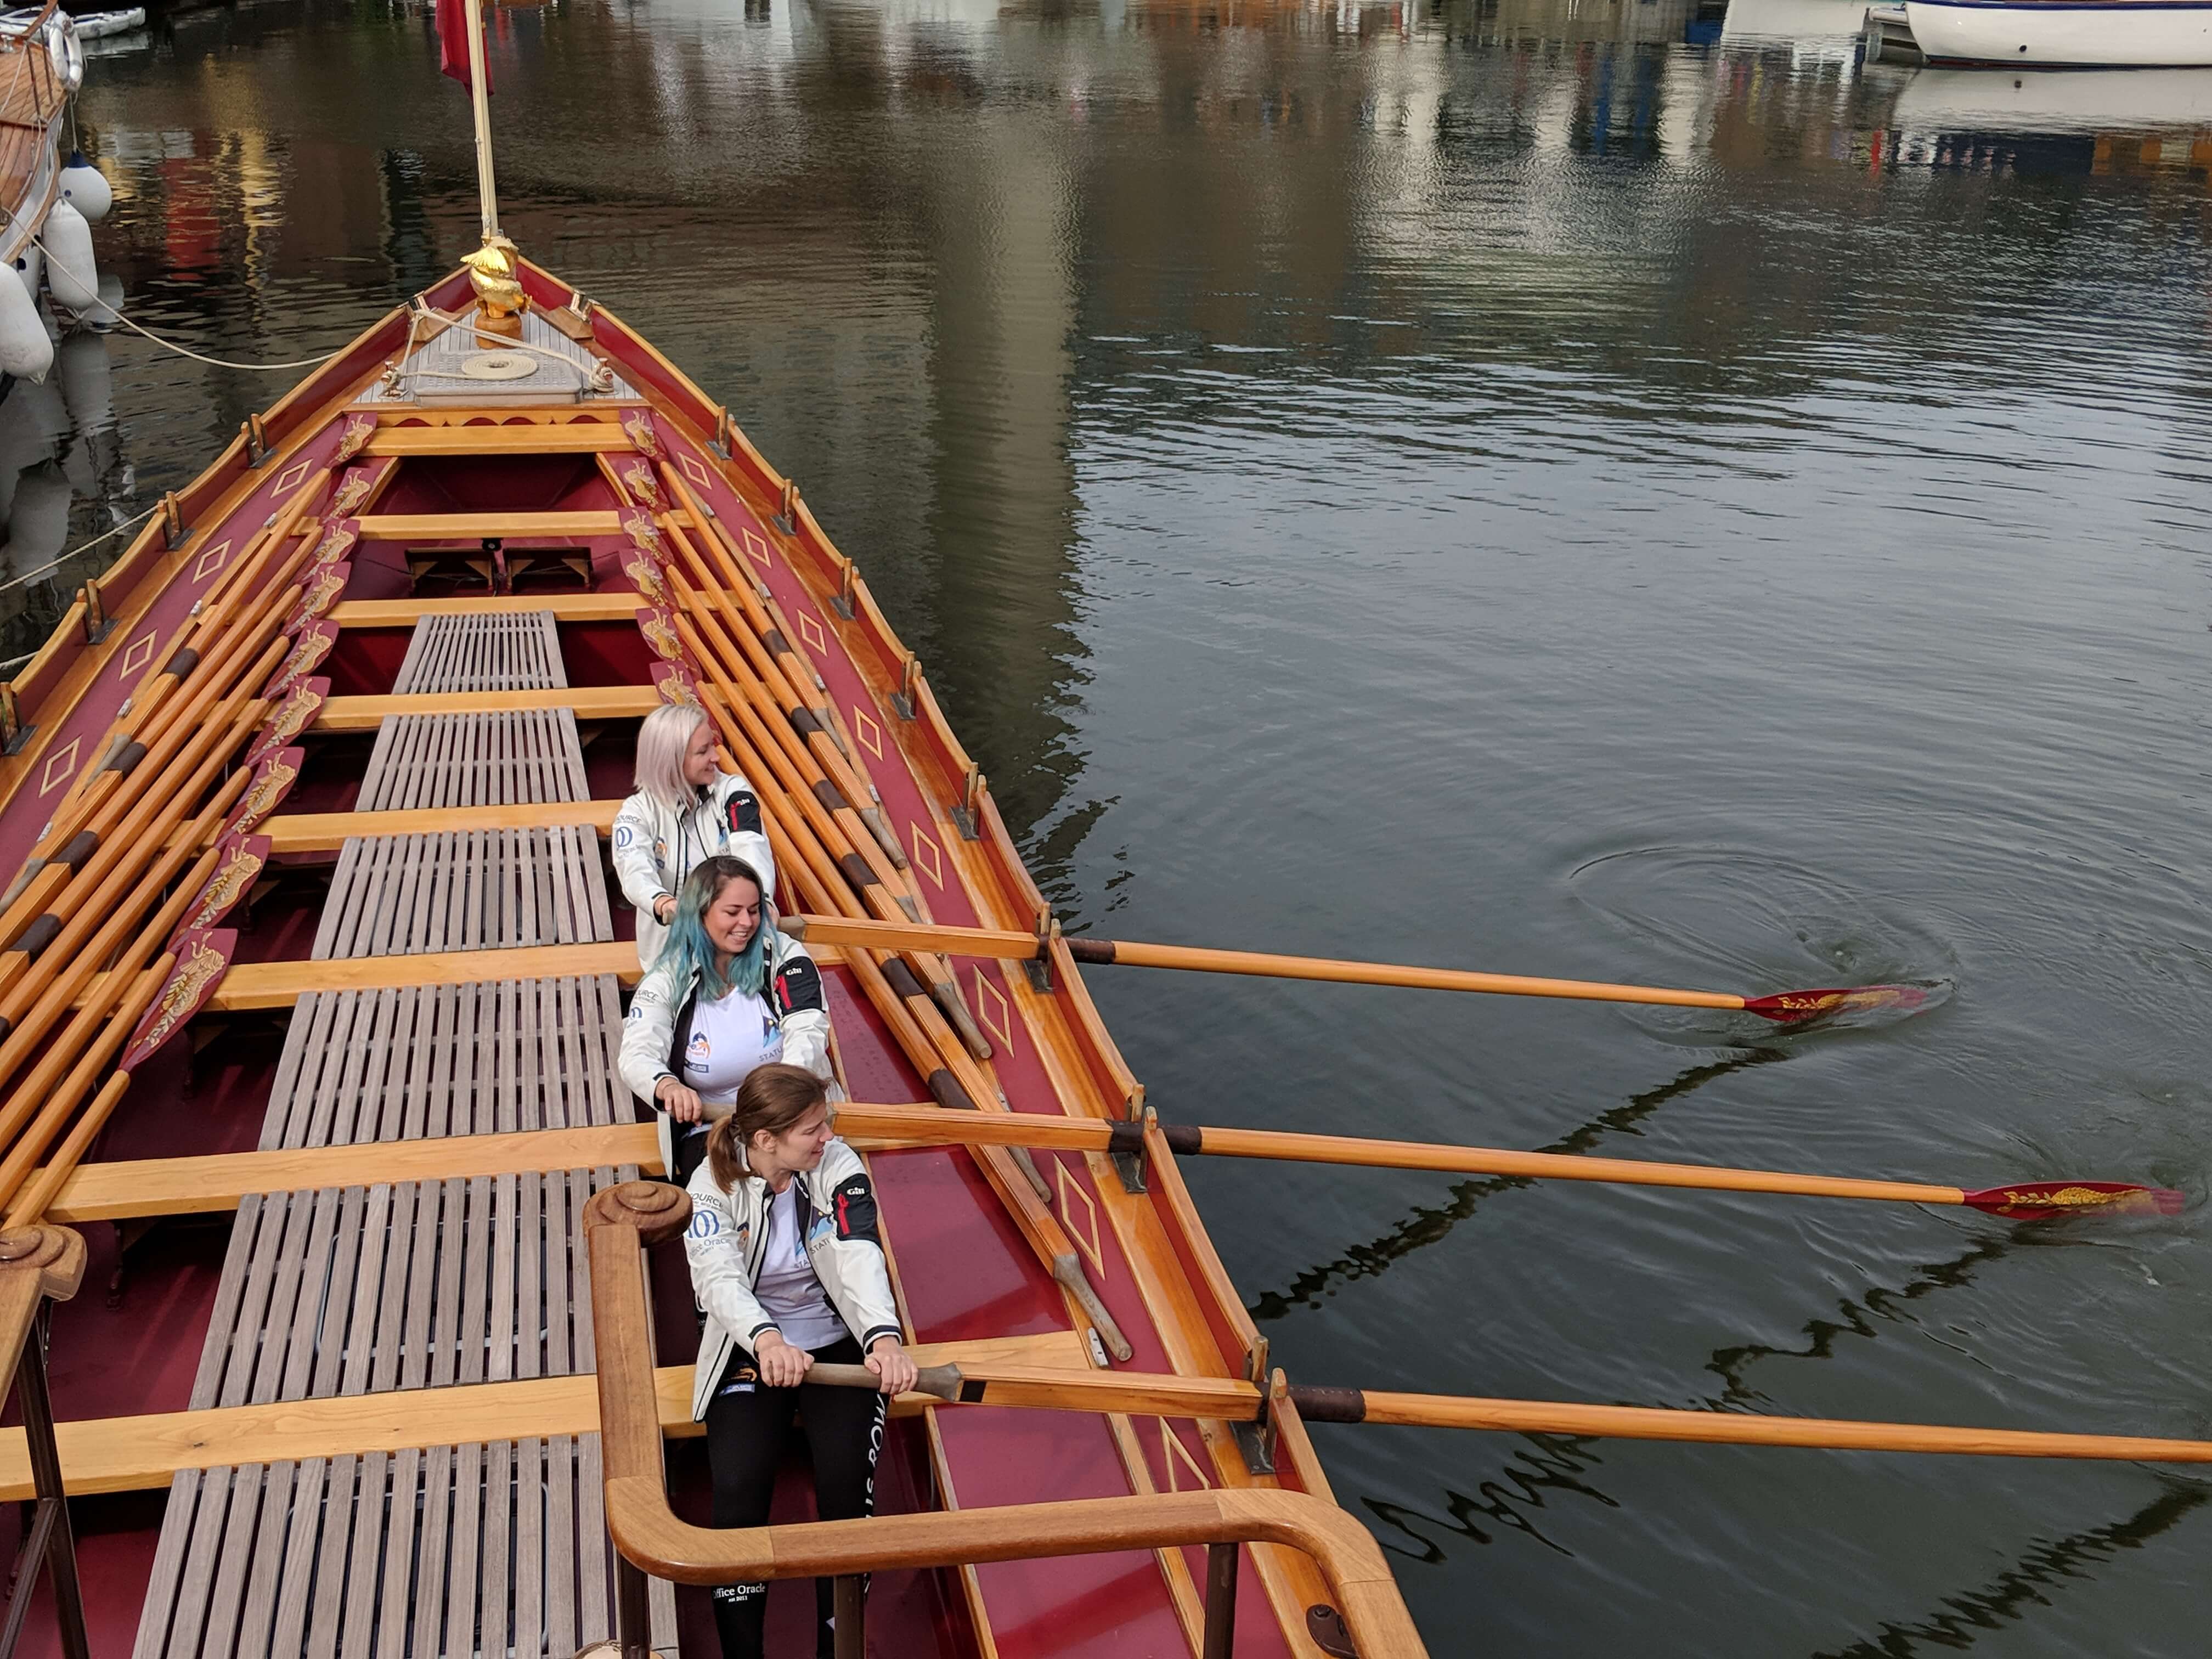 Taking to the oars on Gloriana, the Queen's Rowbarge